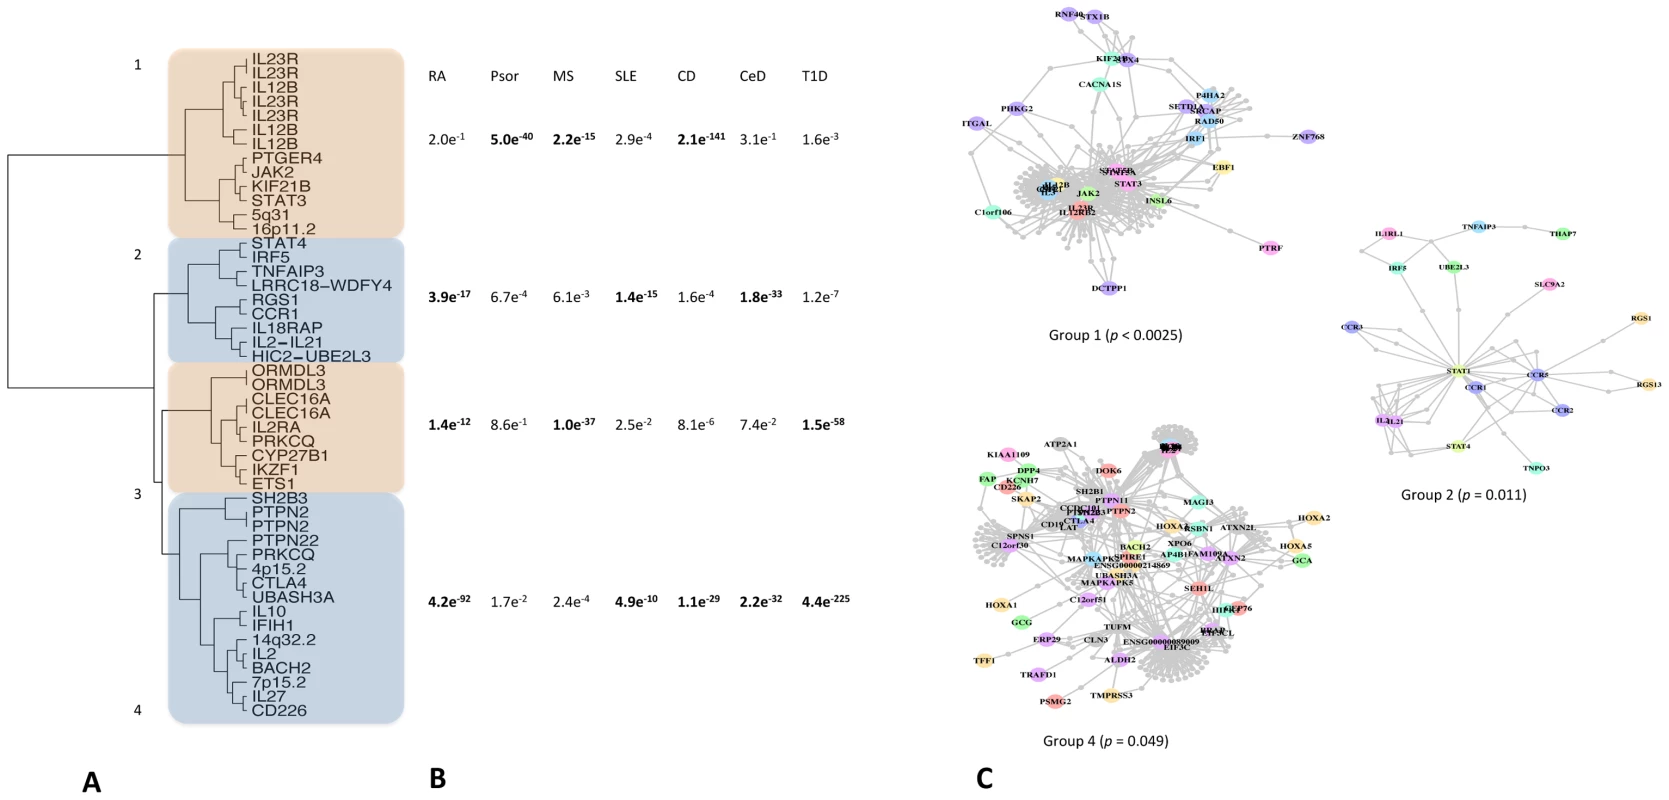 Patterns of association across diseases correlate with protein-protein interactions.